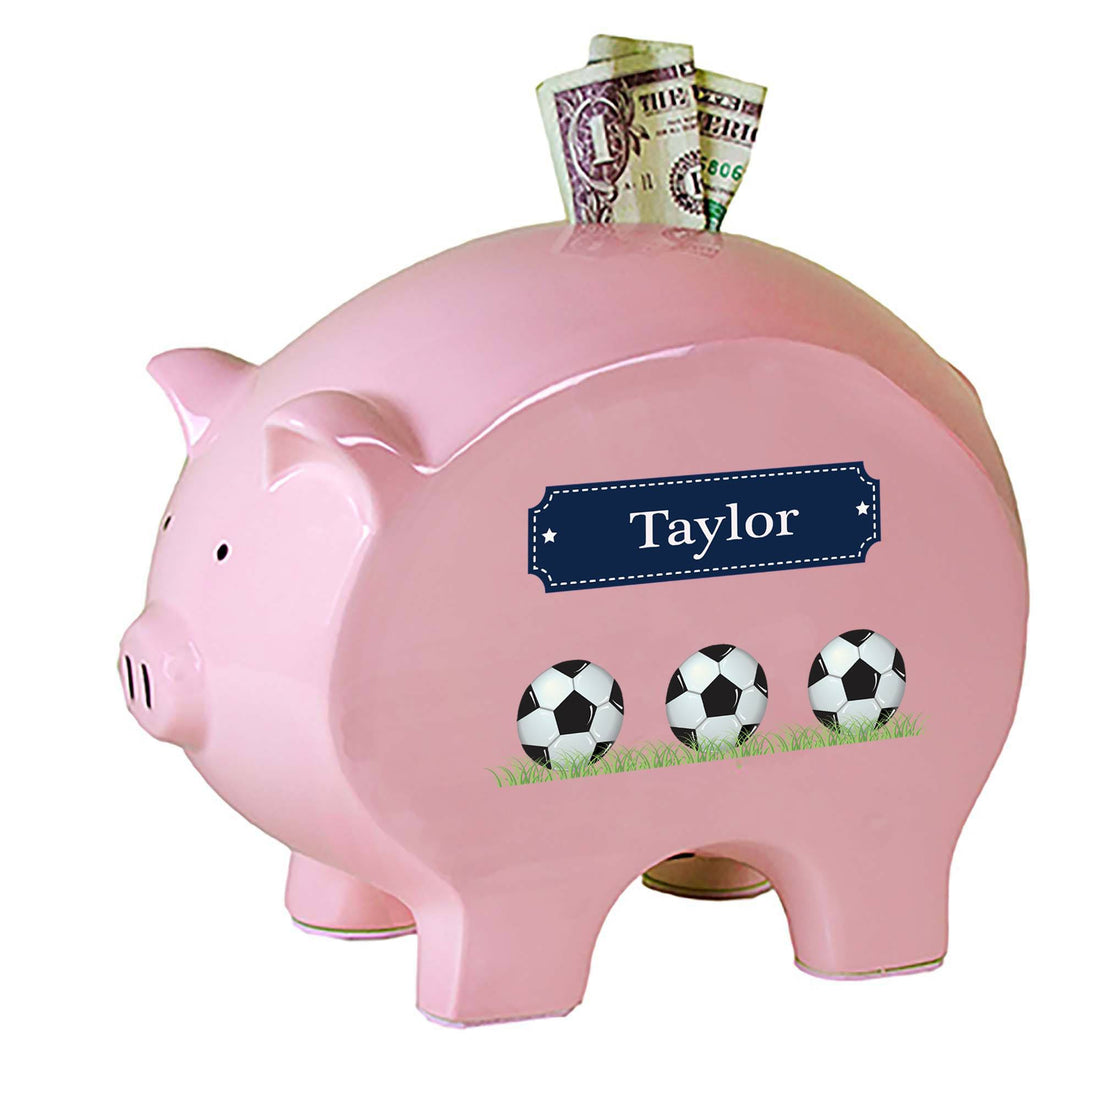 Personalized Pink Piggy Bank with Soccer Balls design